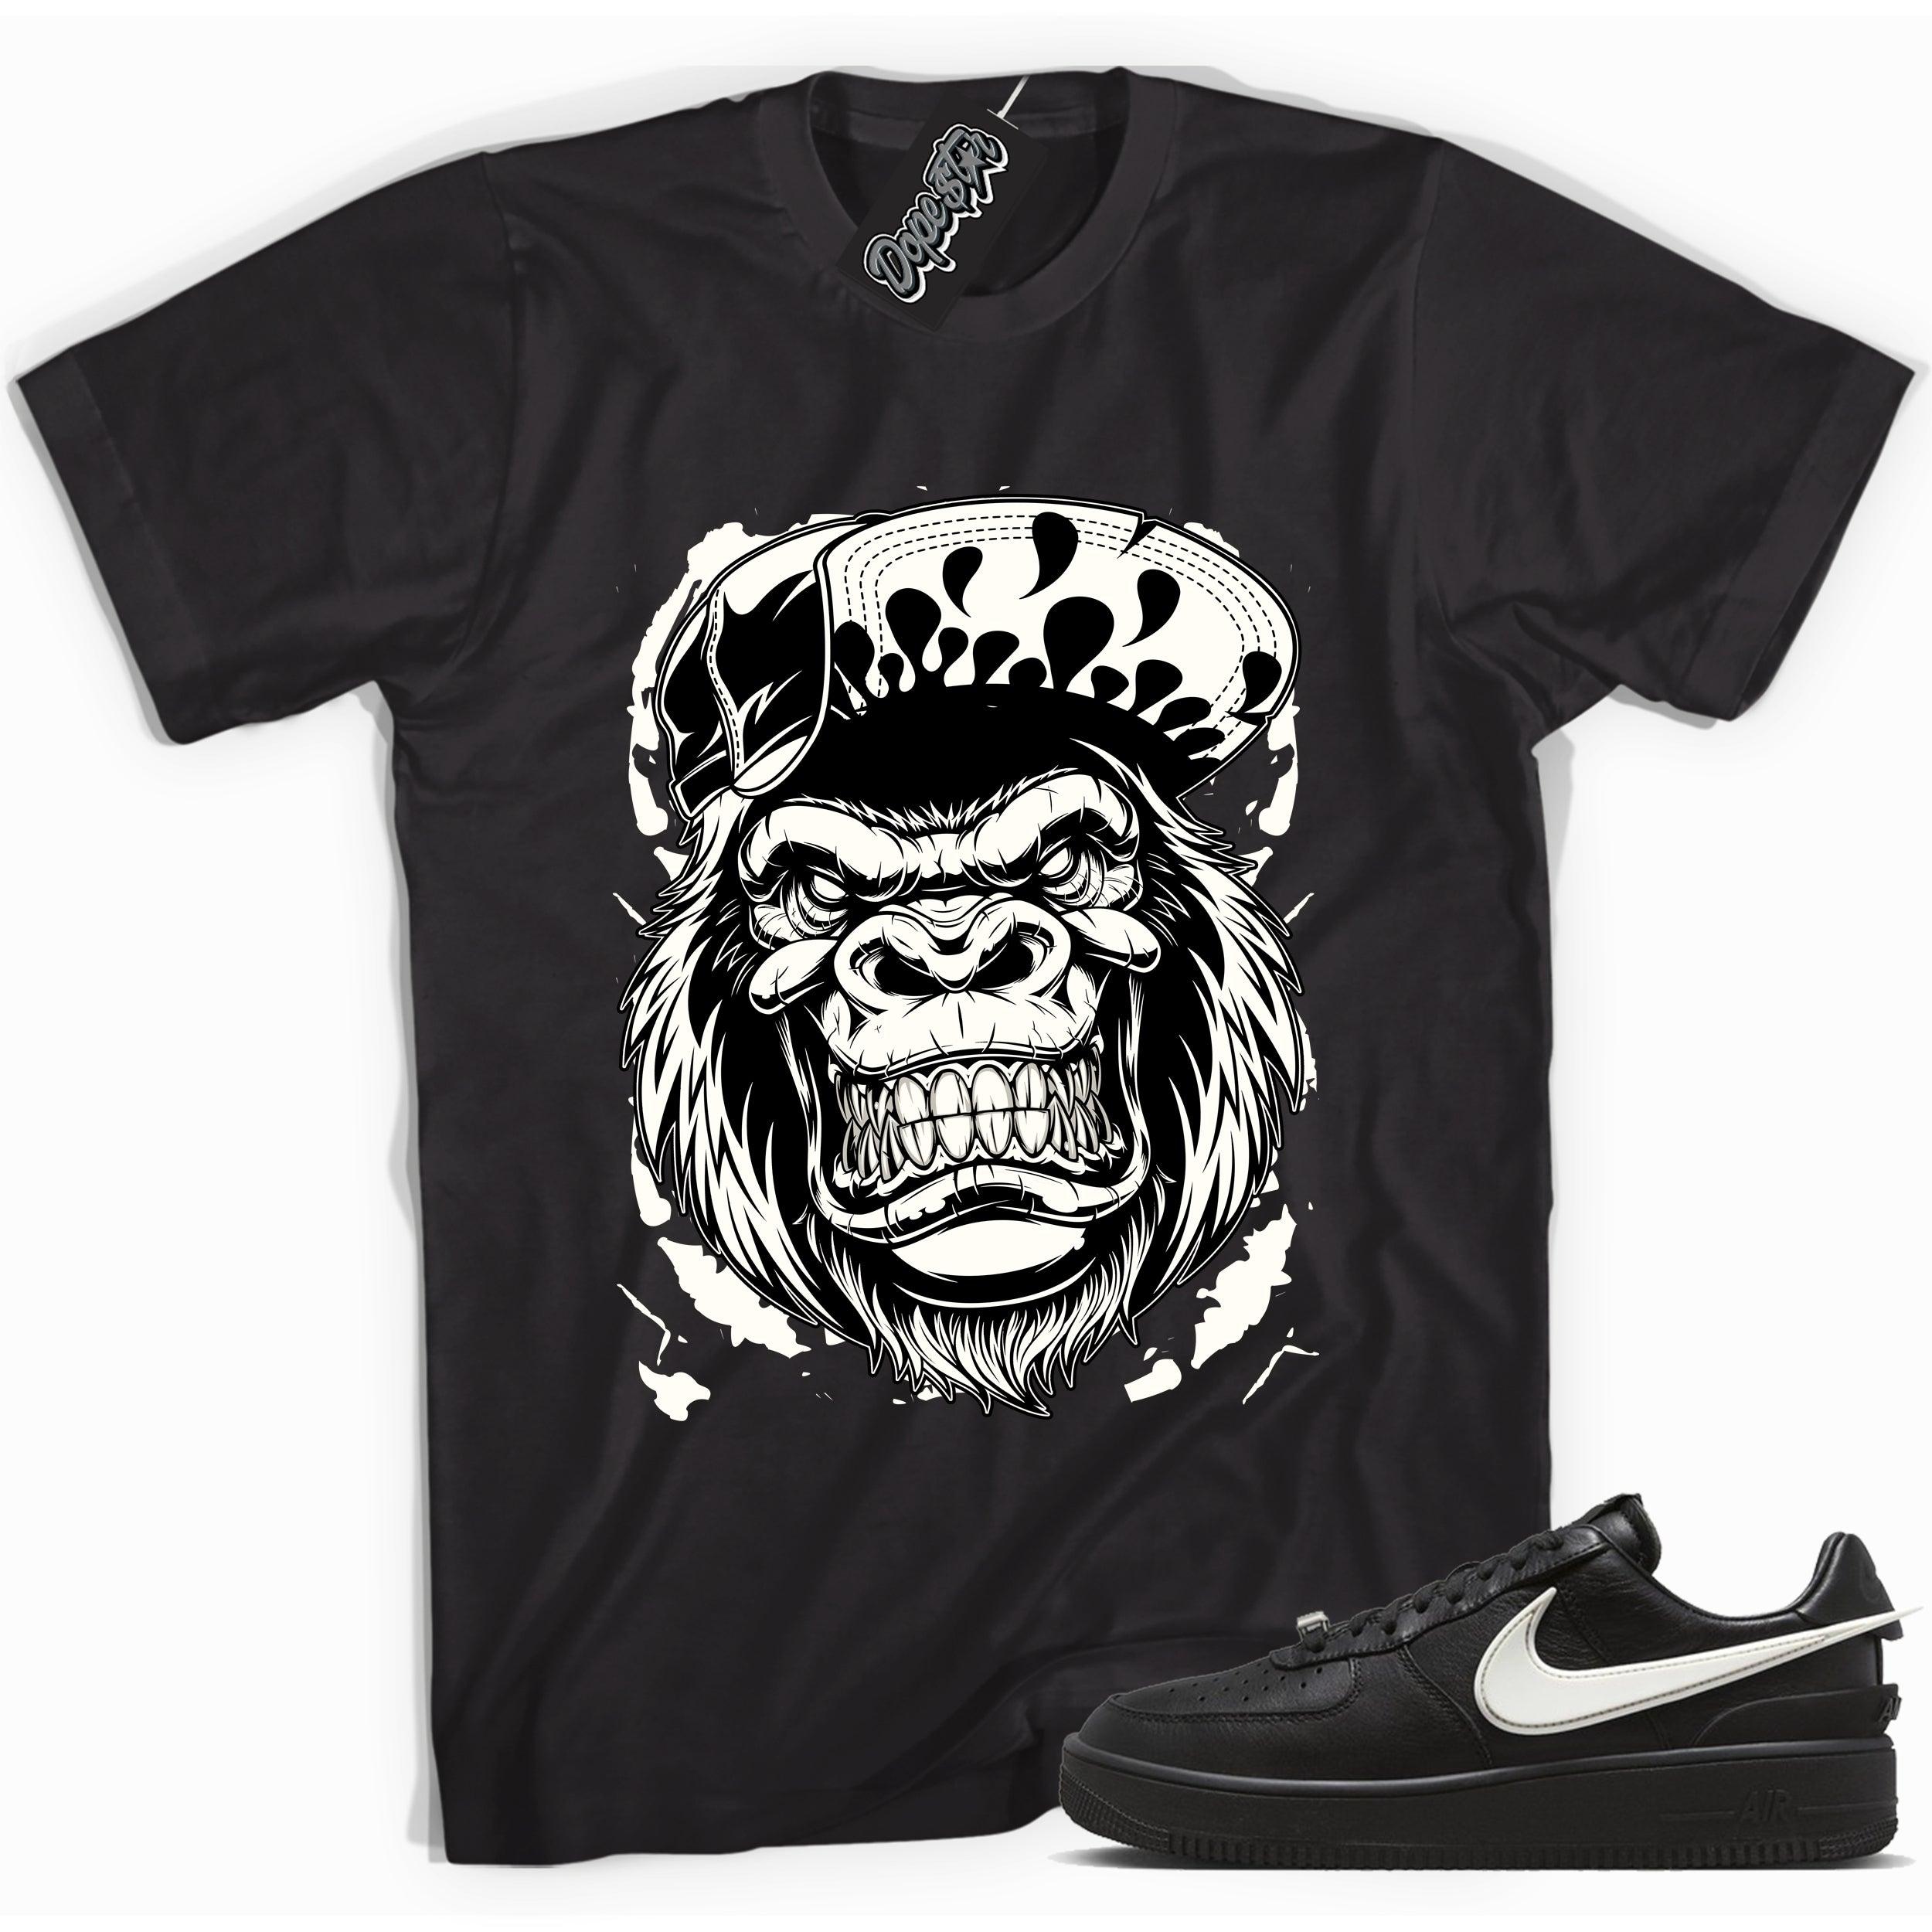 Cool black graphic tee with 'gorilla beast' print, that perfectly matches Nike Air Force 1 Low Ambush Phantom Black sneakers